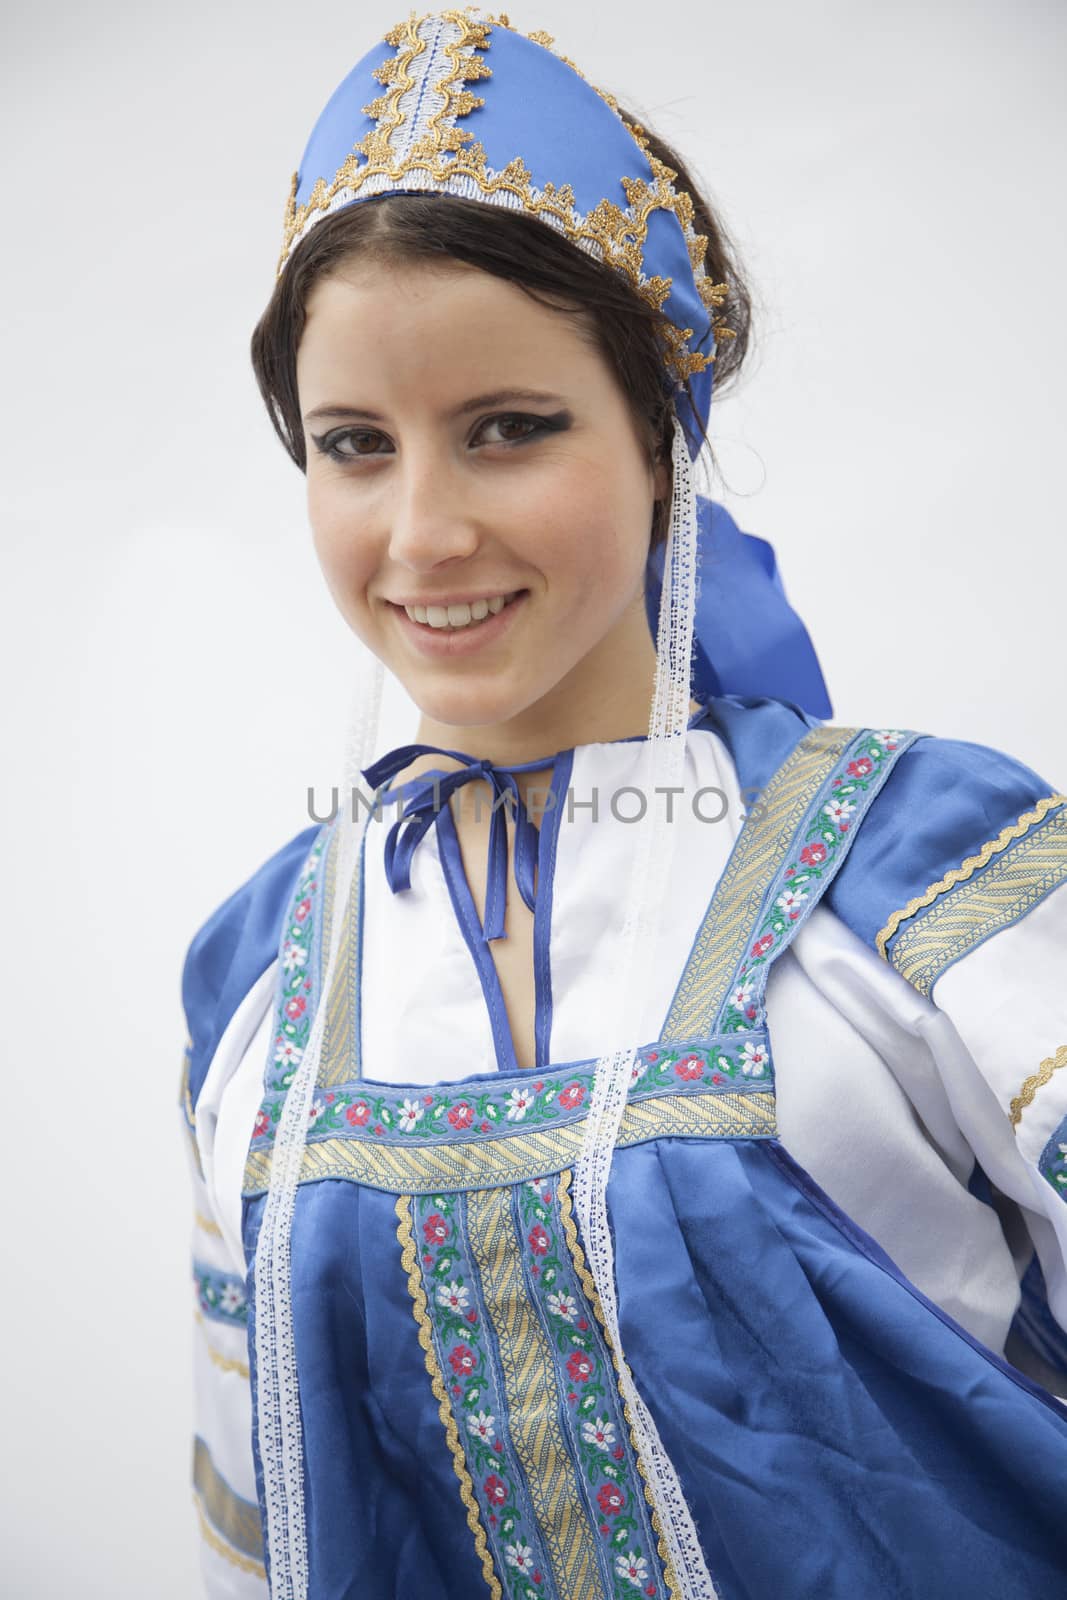 Portrait of young smiling woman in traditional clothing from Russia, studio shot by XiXinXing